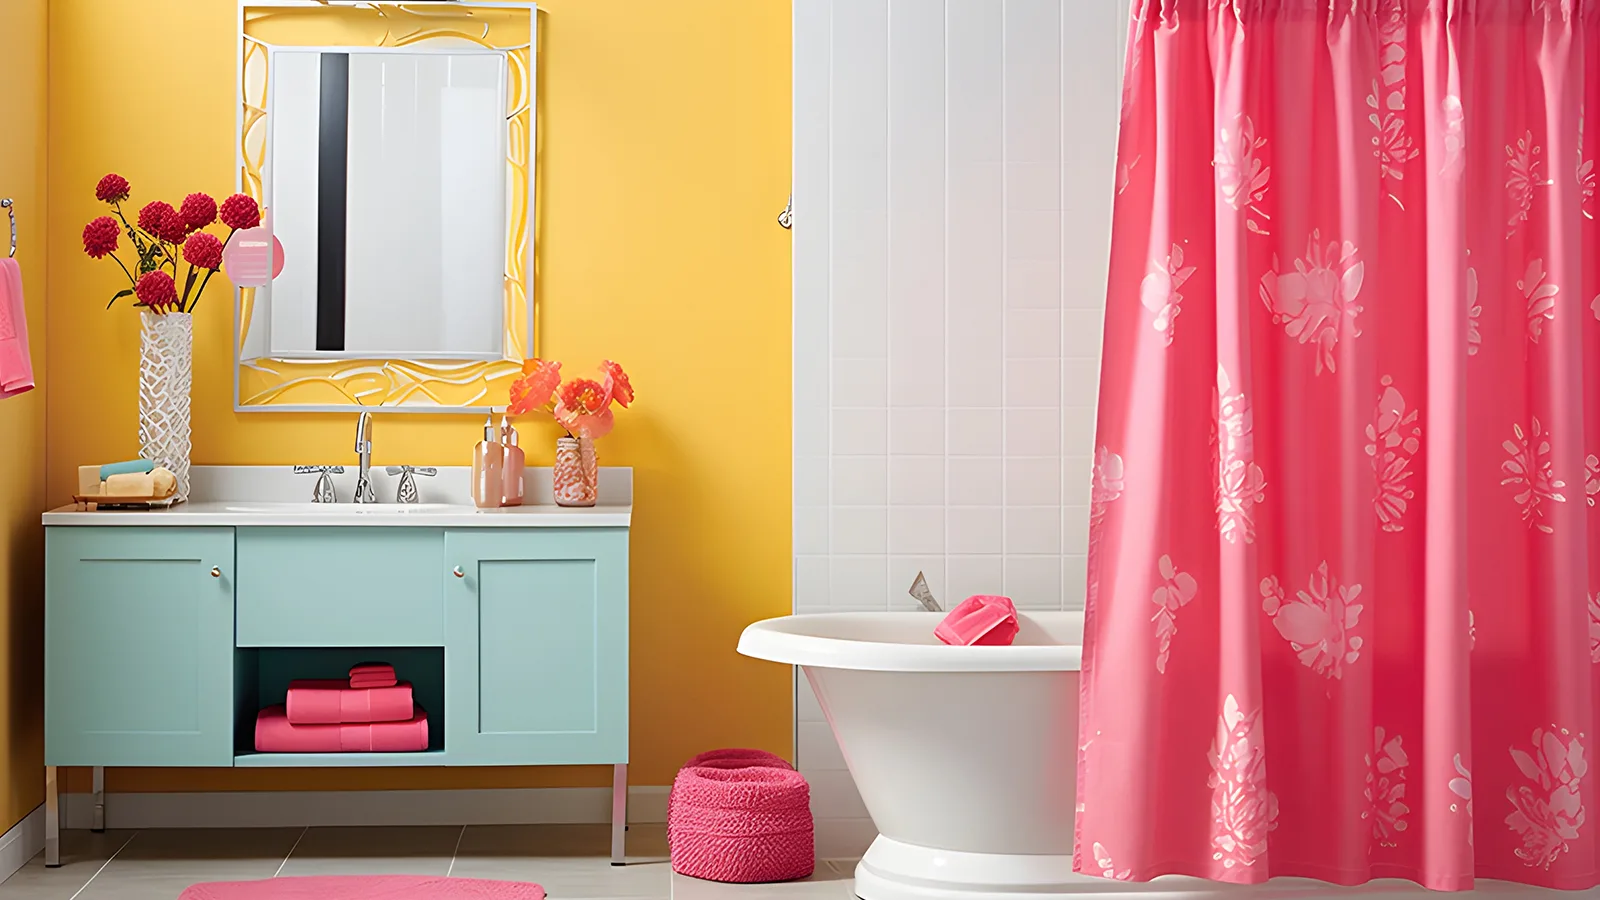 Learn how to decorate your apartment bathroom with a stylish pink shower curtain.